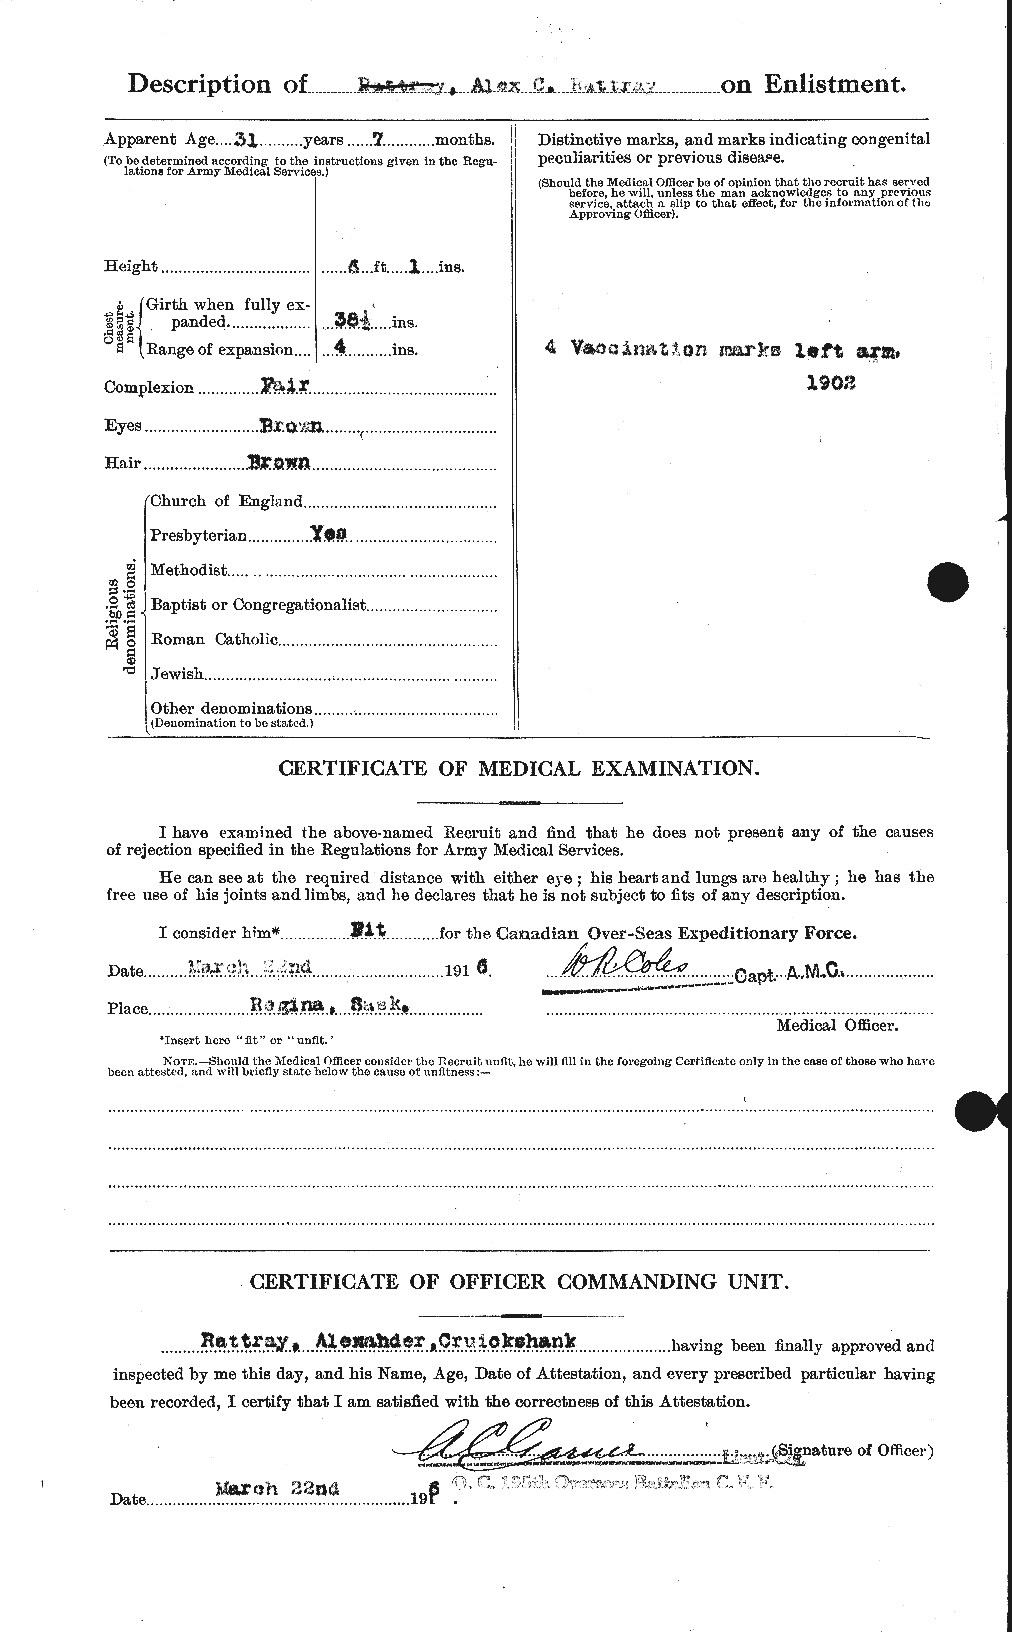 Personnel Records of the First World War - CEF 595688b